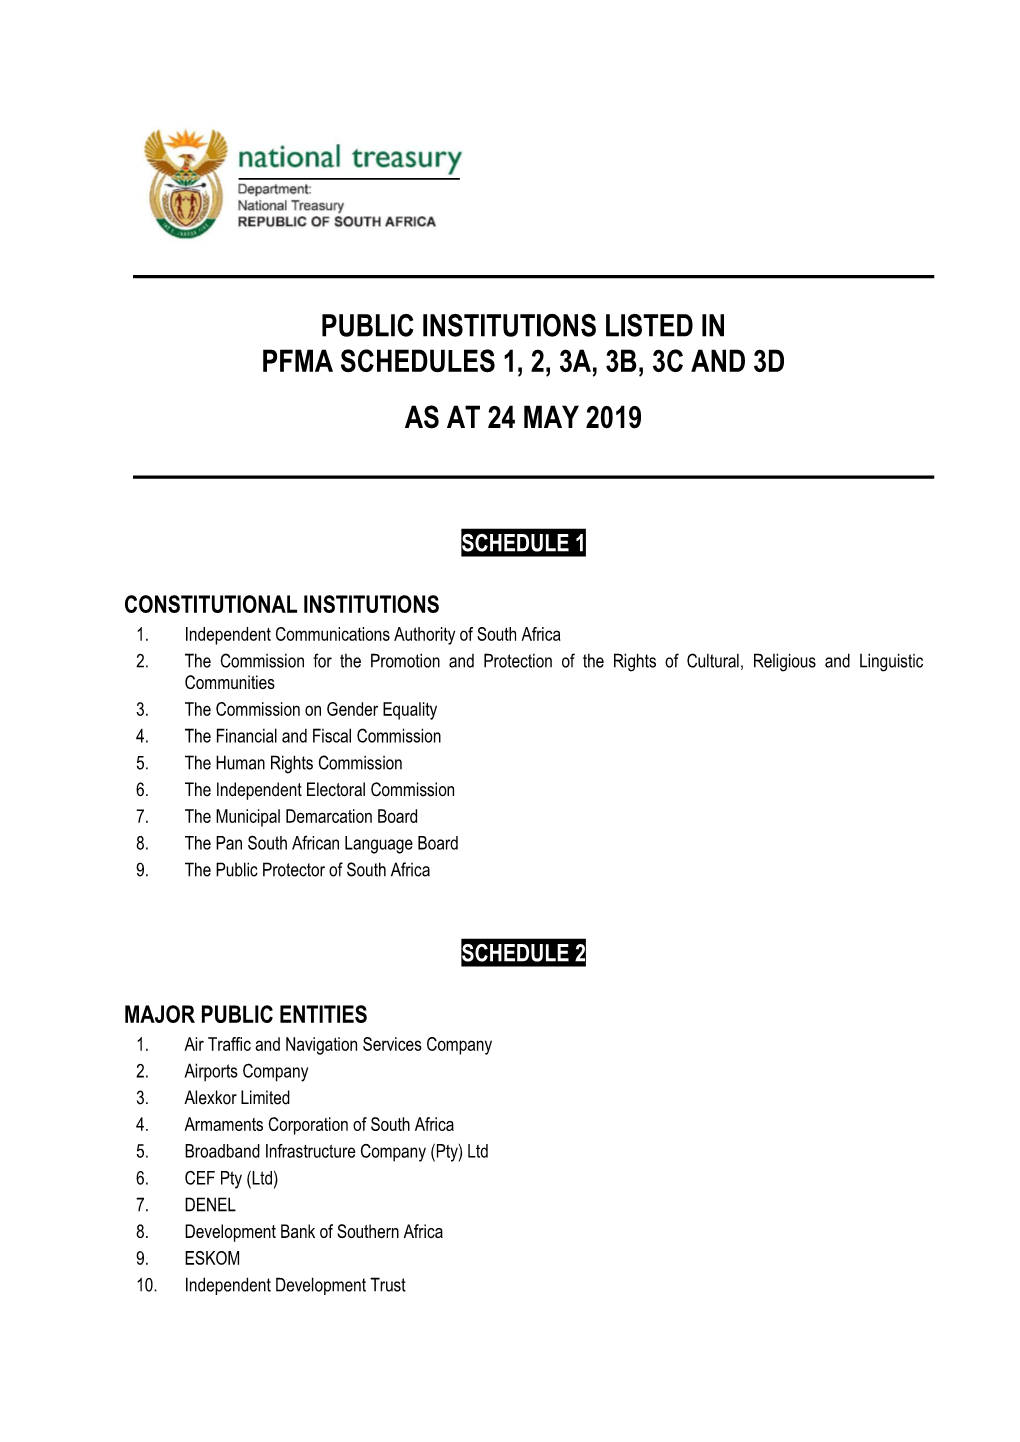 Public Institutions Listed in Pfma Schedules 1, 2, 3A, 3B, 3C and 3D As at 24 May 2019